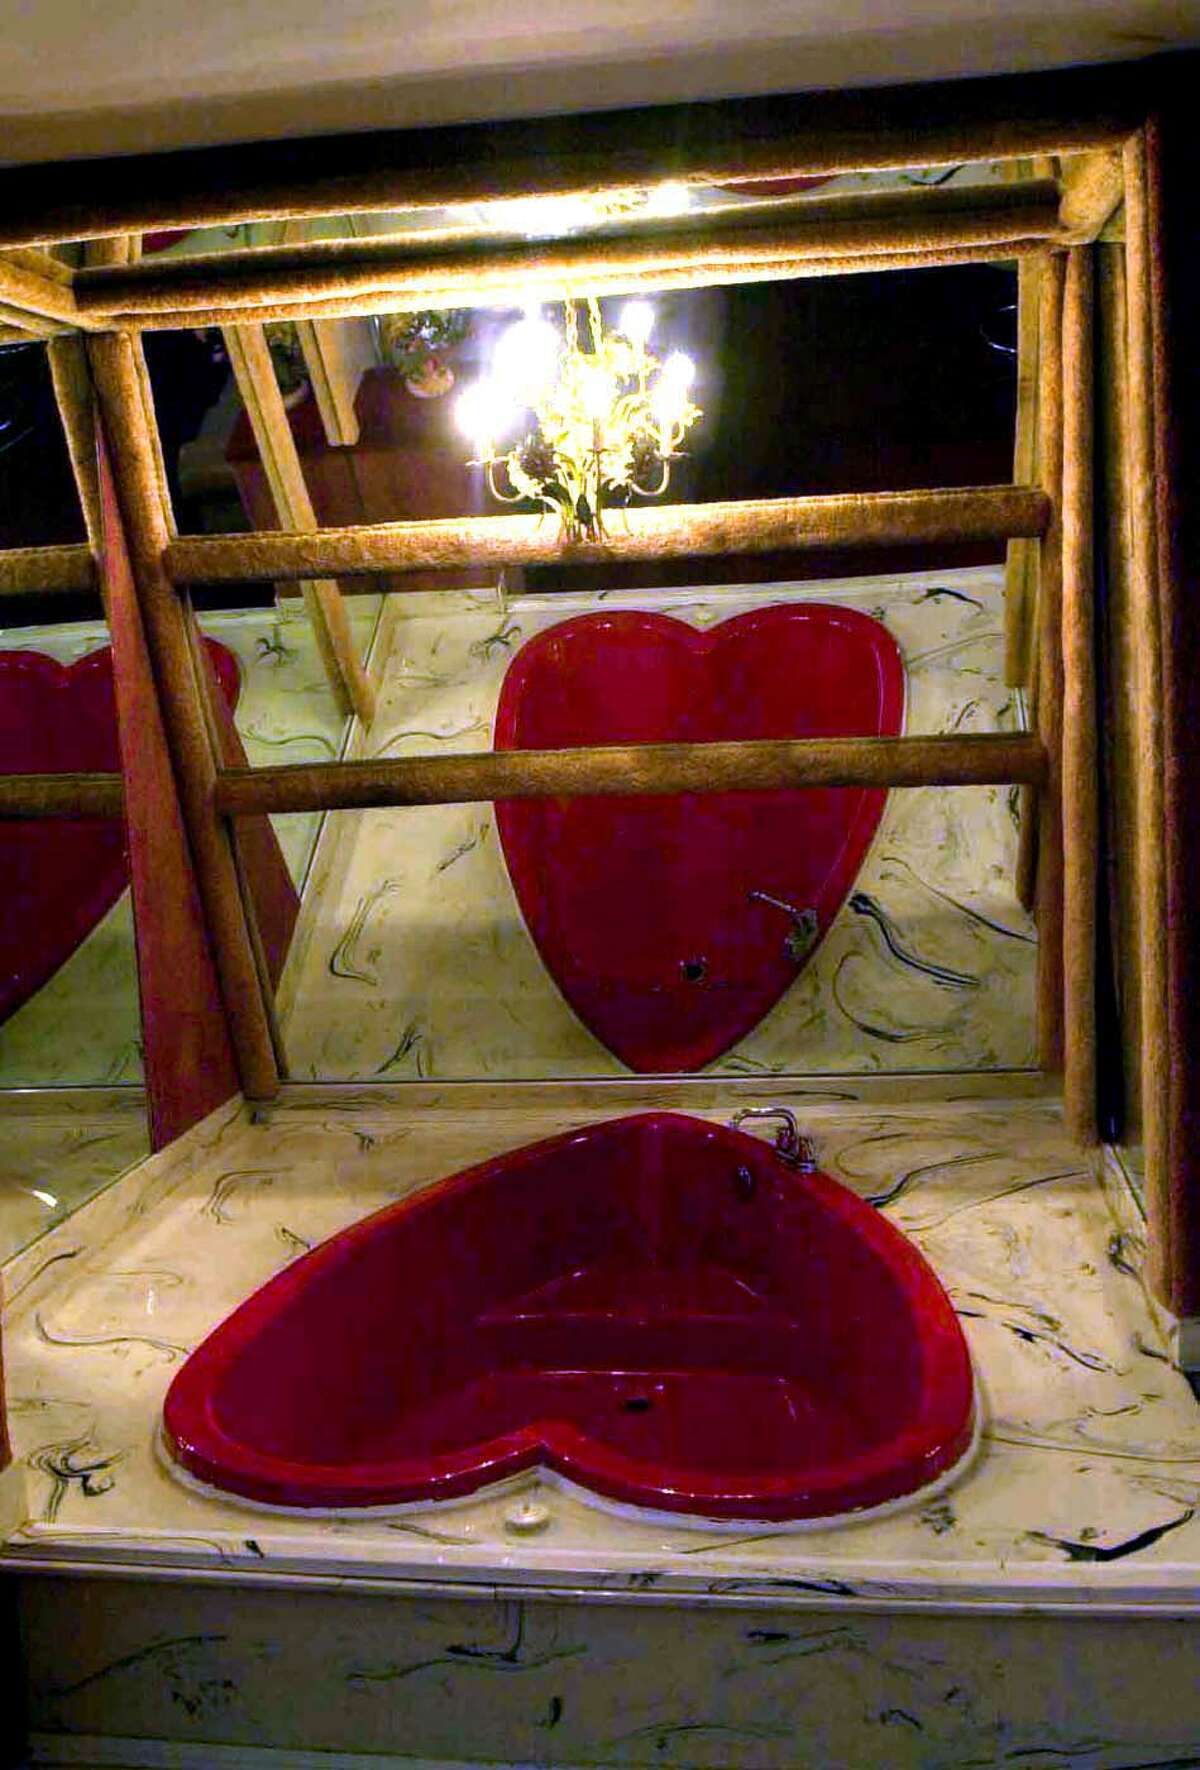 A heart shaped Jacuzzi is surrounded by mirrors and lights in one of the Valentine Rooms at the Governors Inn on Wednesday, Feb. 5, 2003, in Guilderland, N.Y. (Steve Jacobs/Times Union)